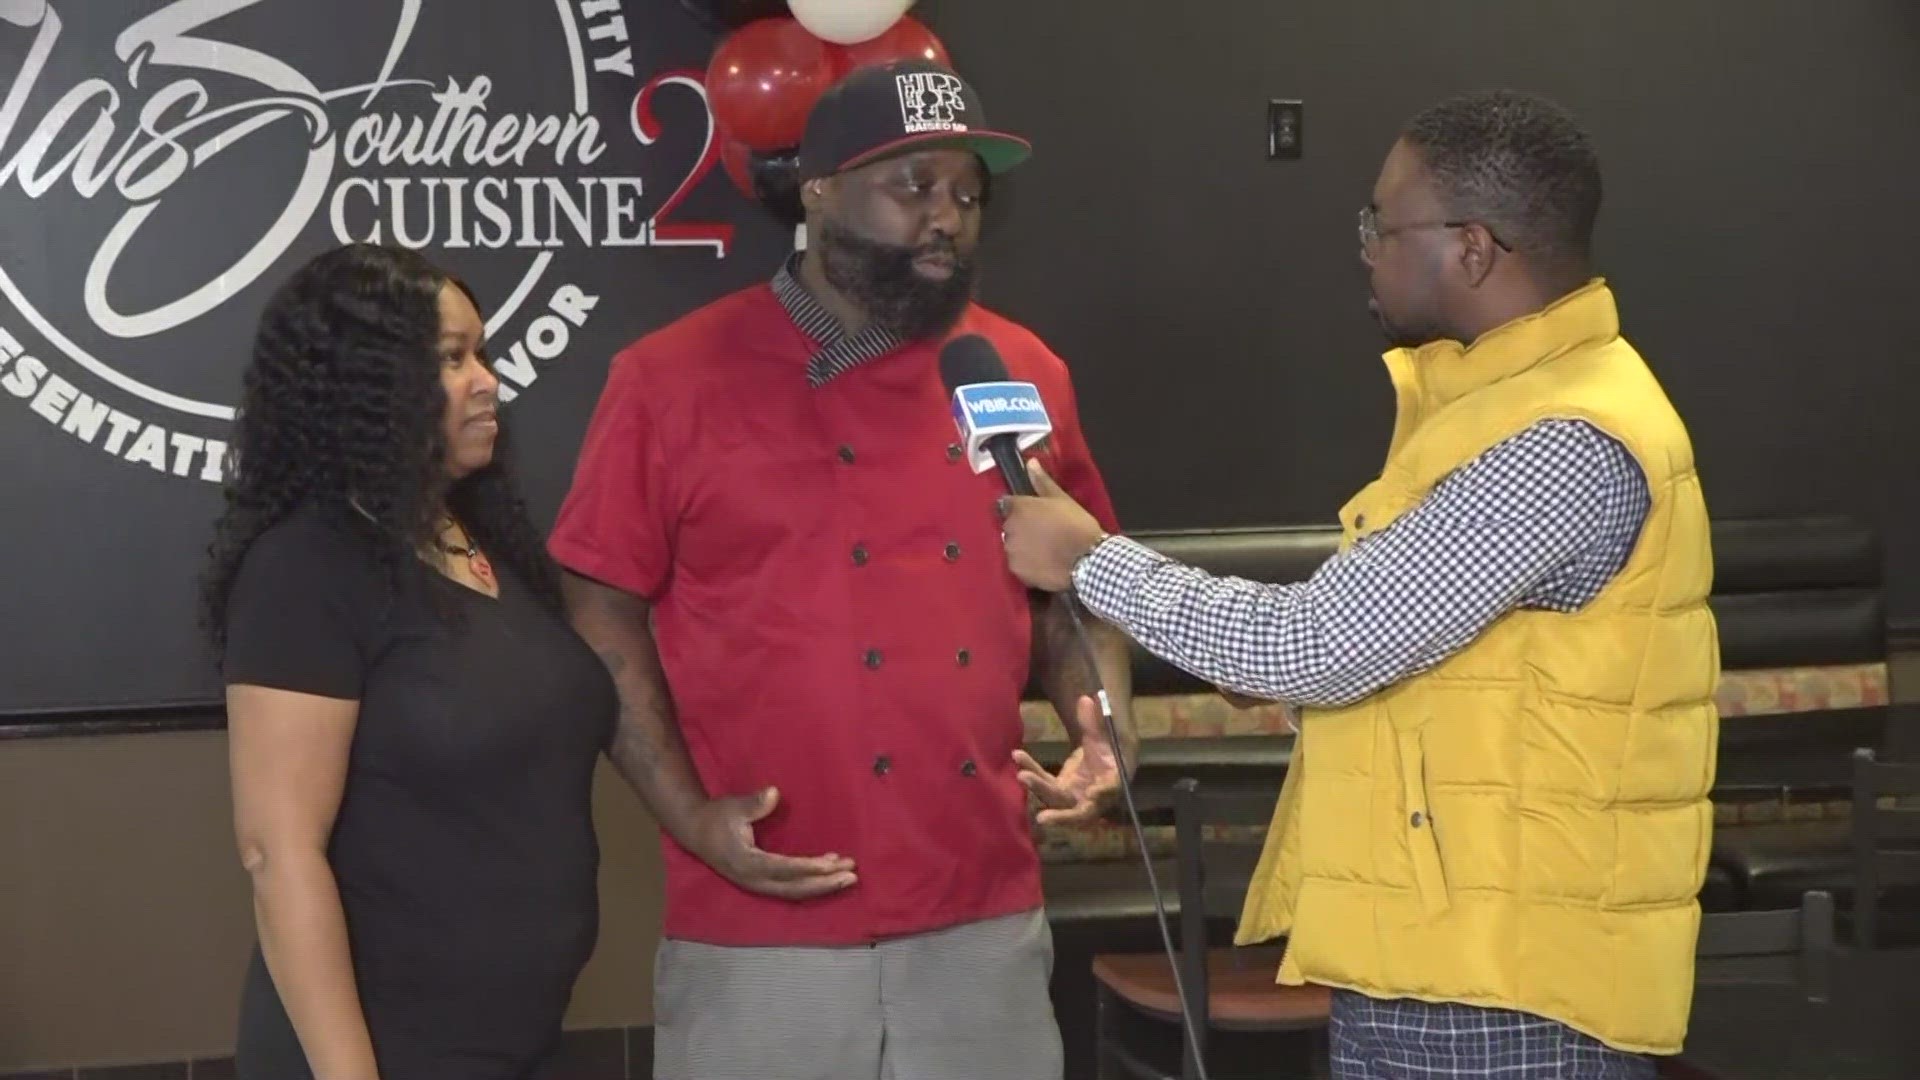 Ola's Southern Cuisine is where Black history, music and food become the heart and soul of the business.